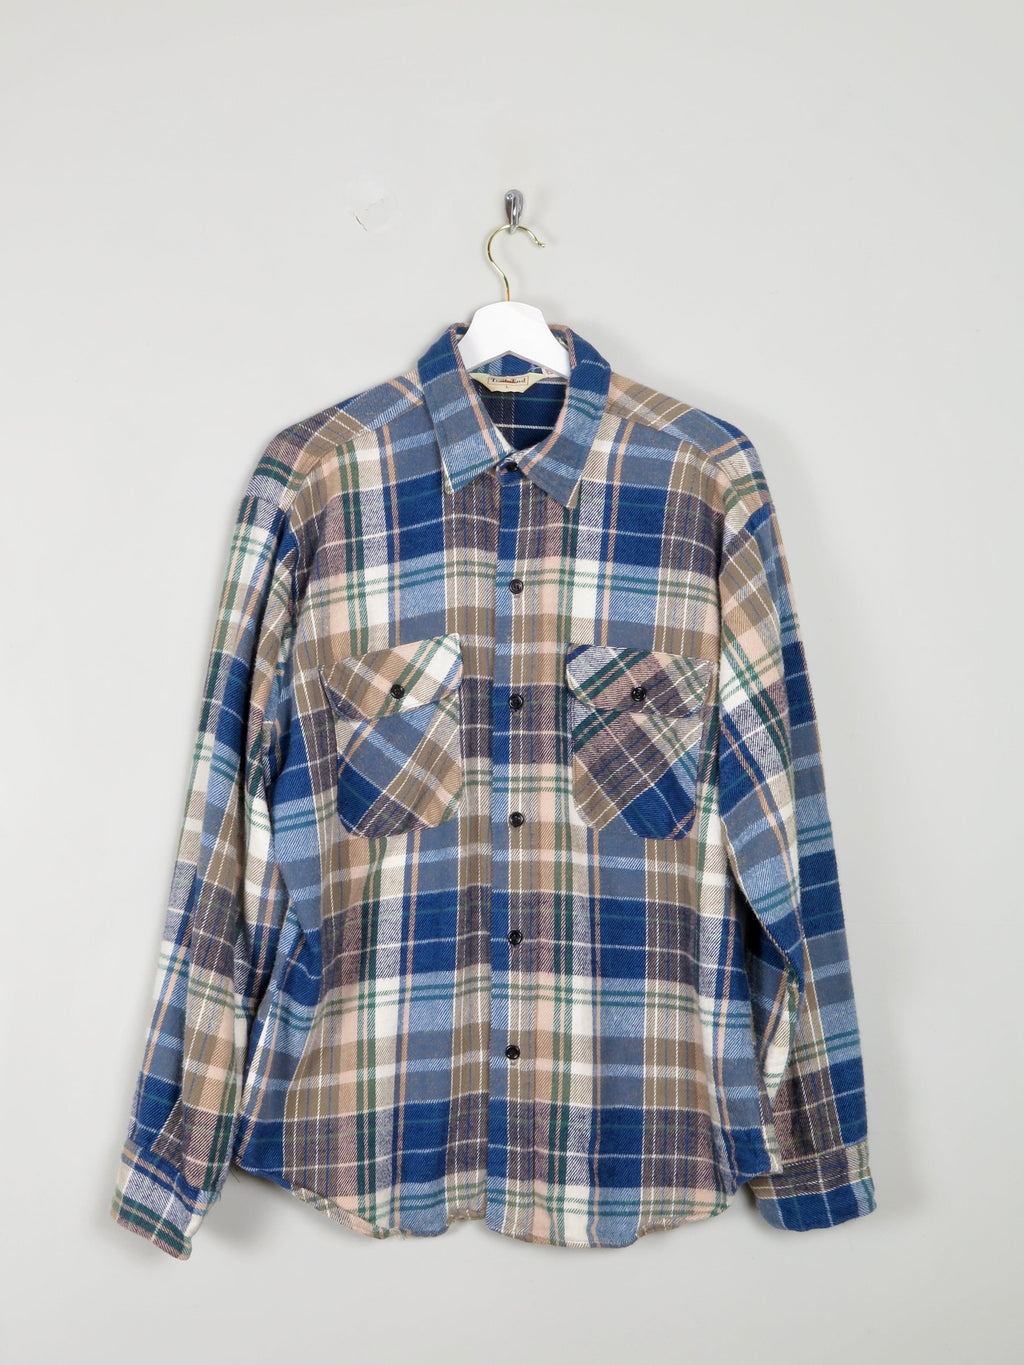 Men's Cream /Blue/Brown/Brown Heavy Quality Vintage Flannel Shirt L - The Harlequin